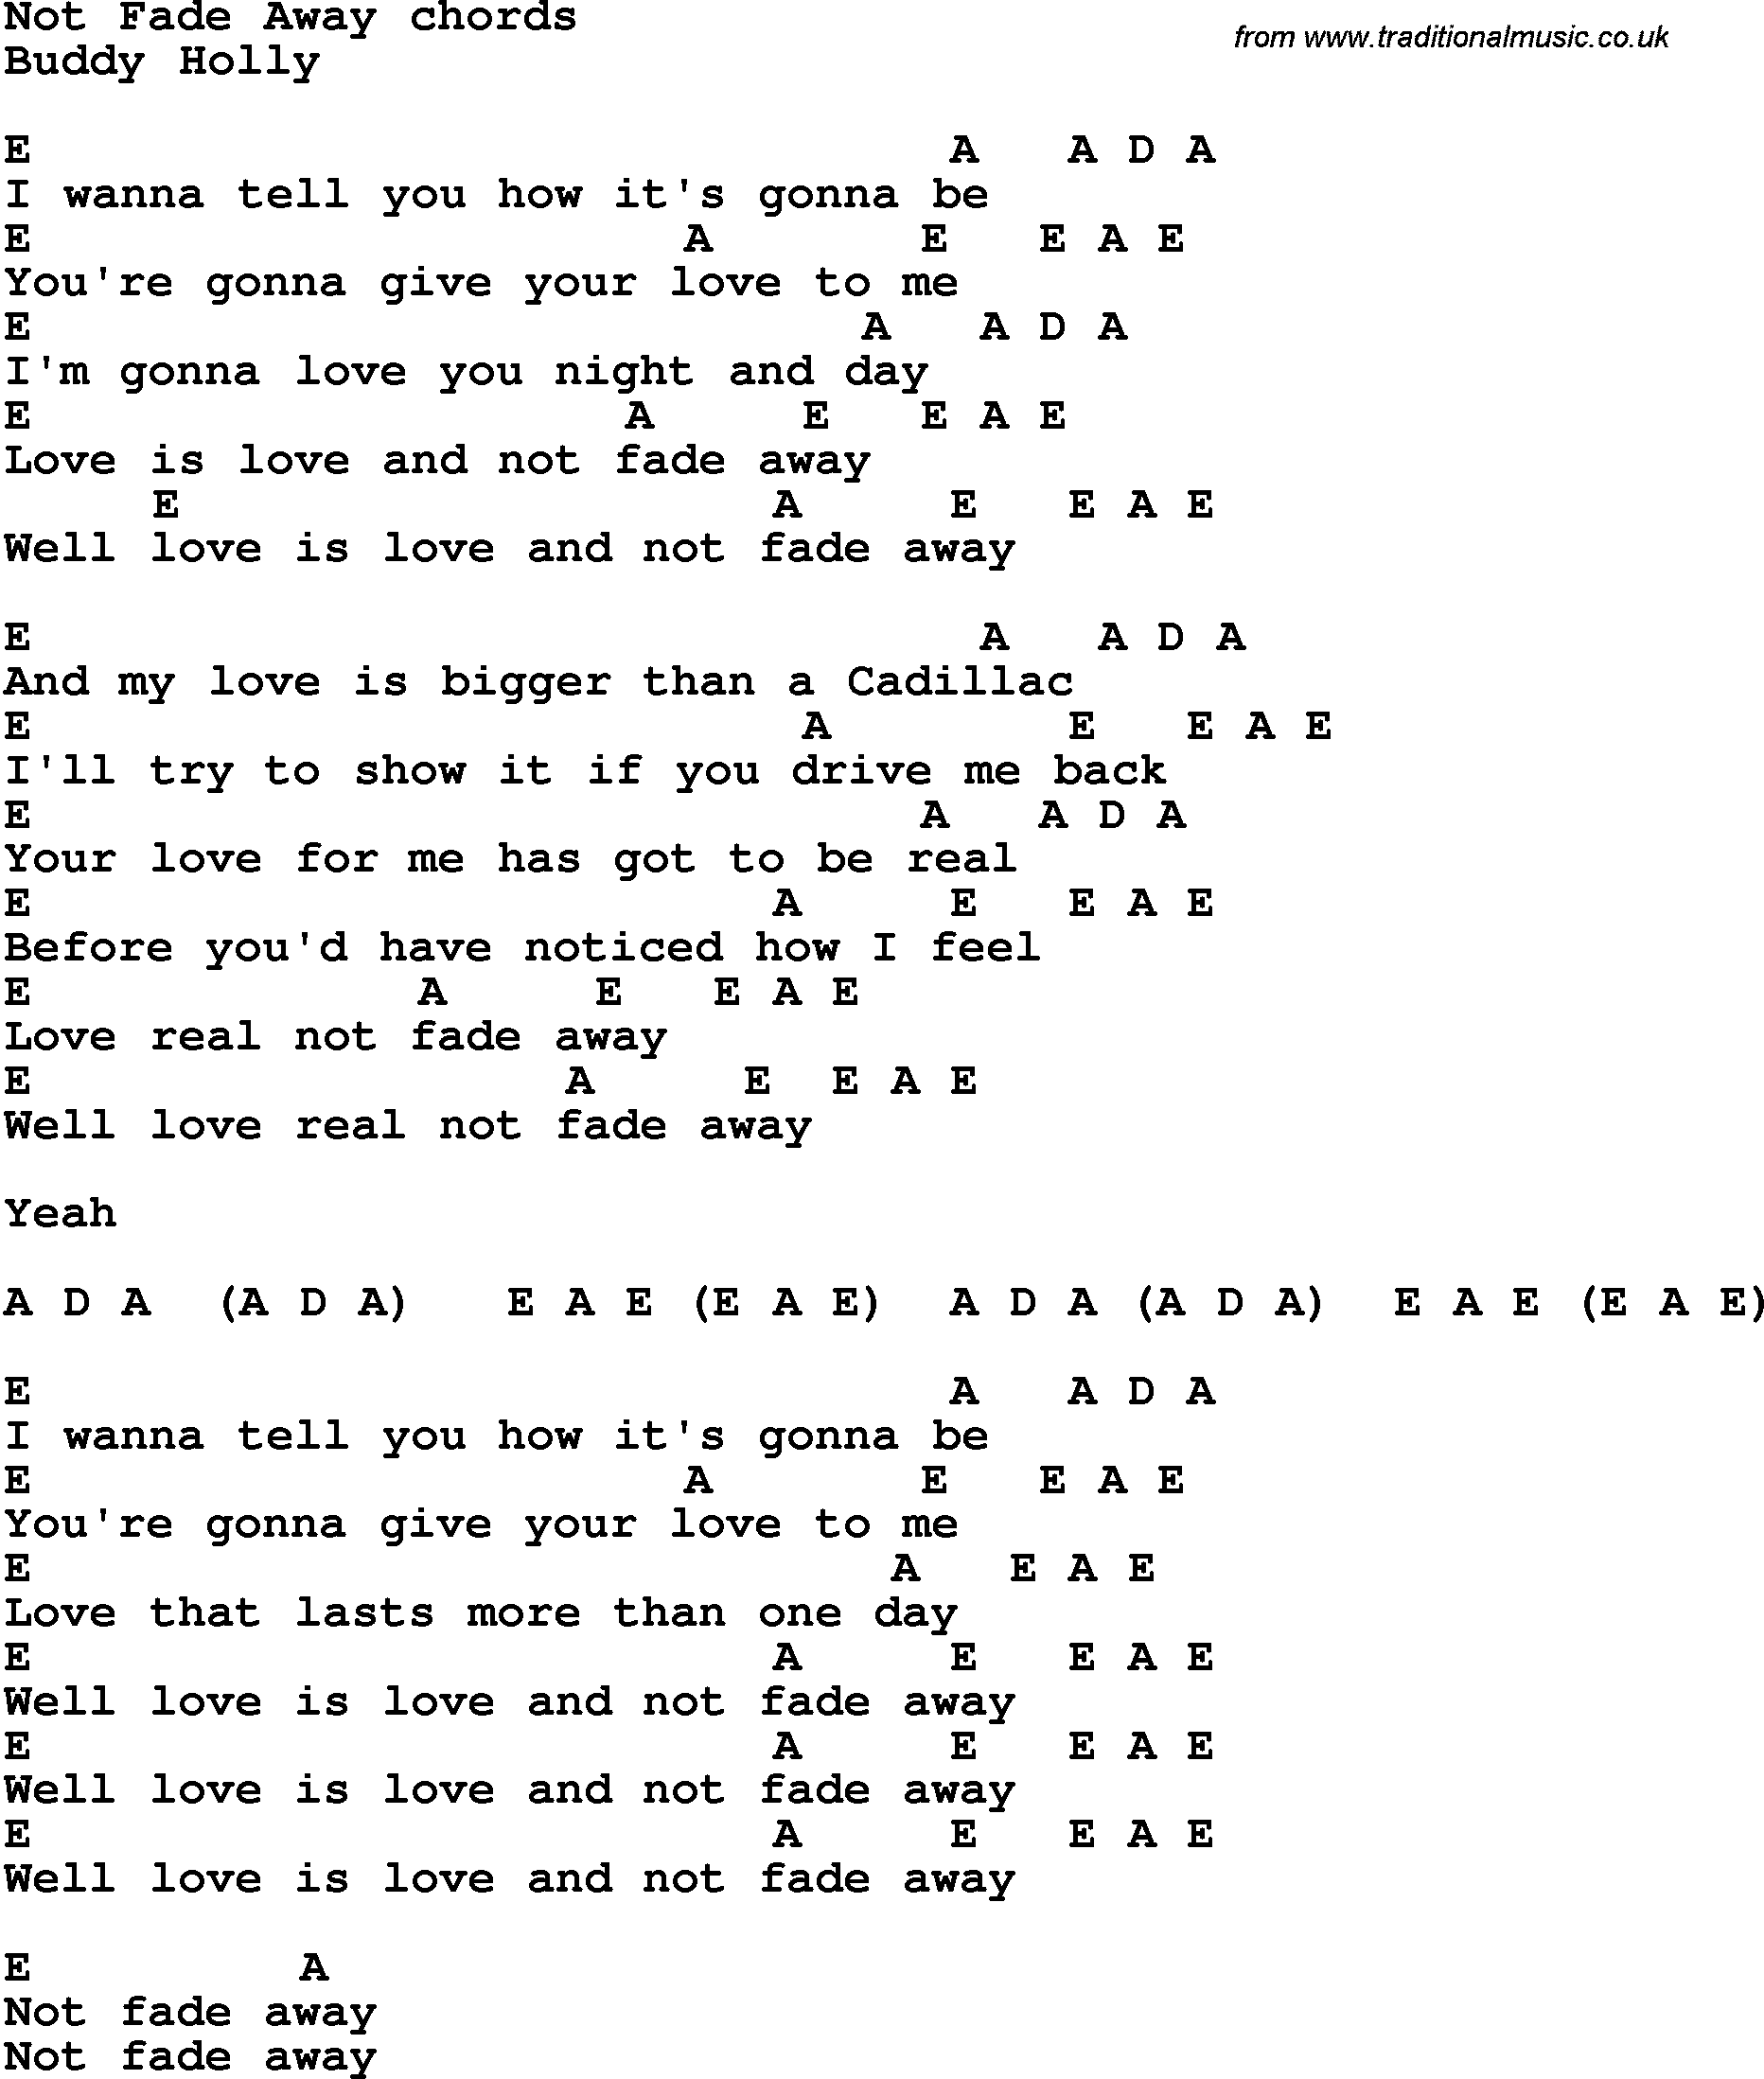 Song Lyrics with guitar chords for Not Fade Away - Buddy Holly